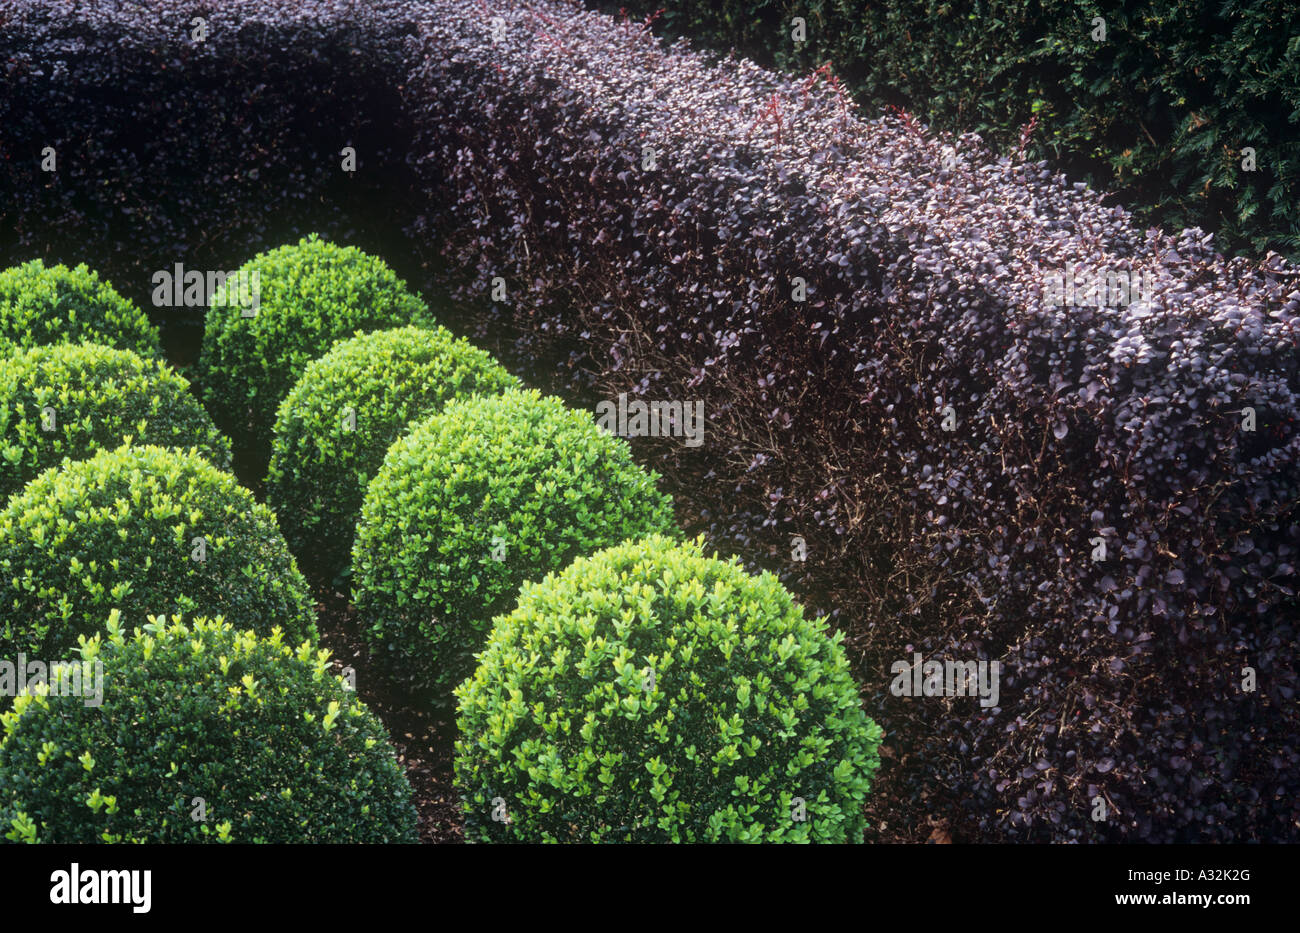 Mid-green Box or Buxus shrubs clipped into low spheres contrasting with deep purple of Barberry hedge or Berberis thunbergii Stock Photo